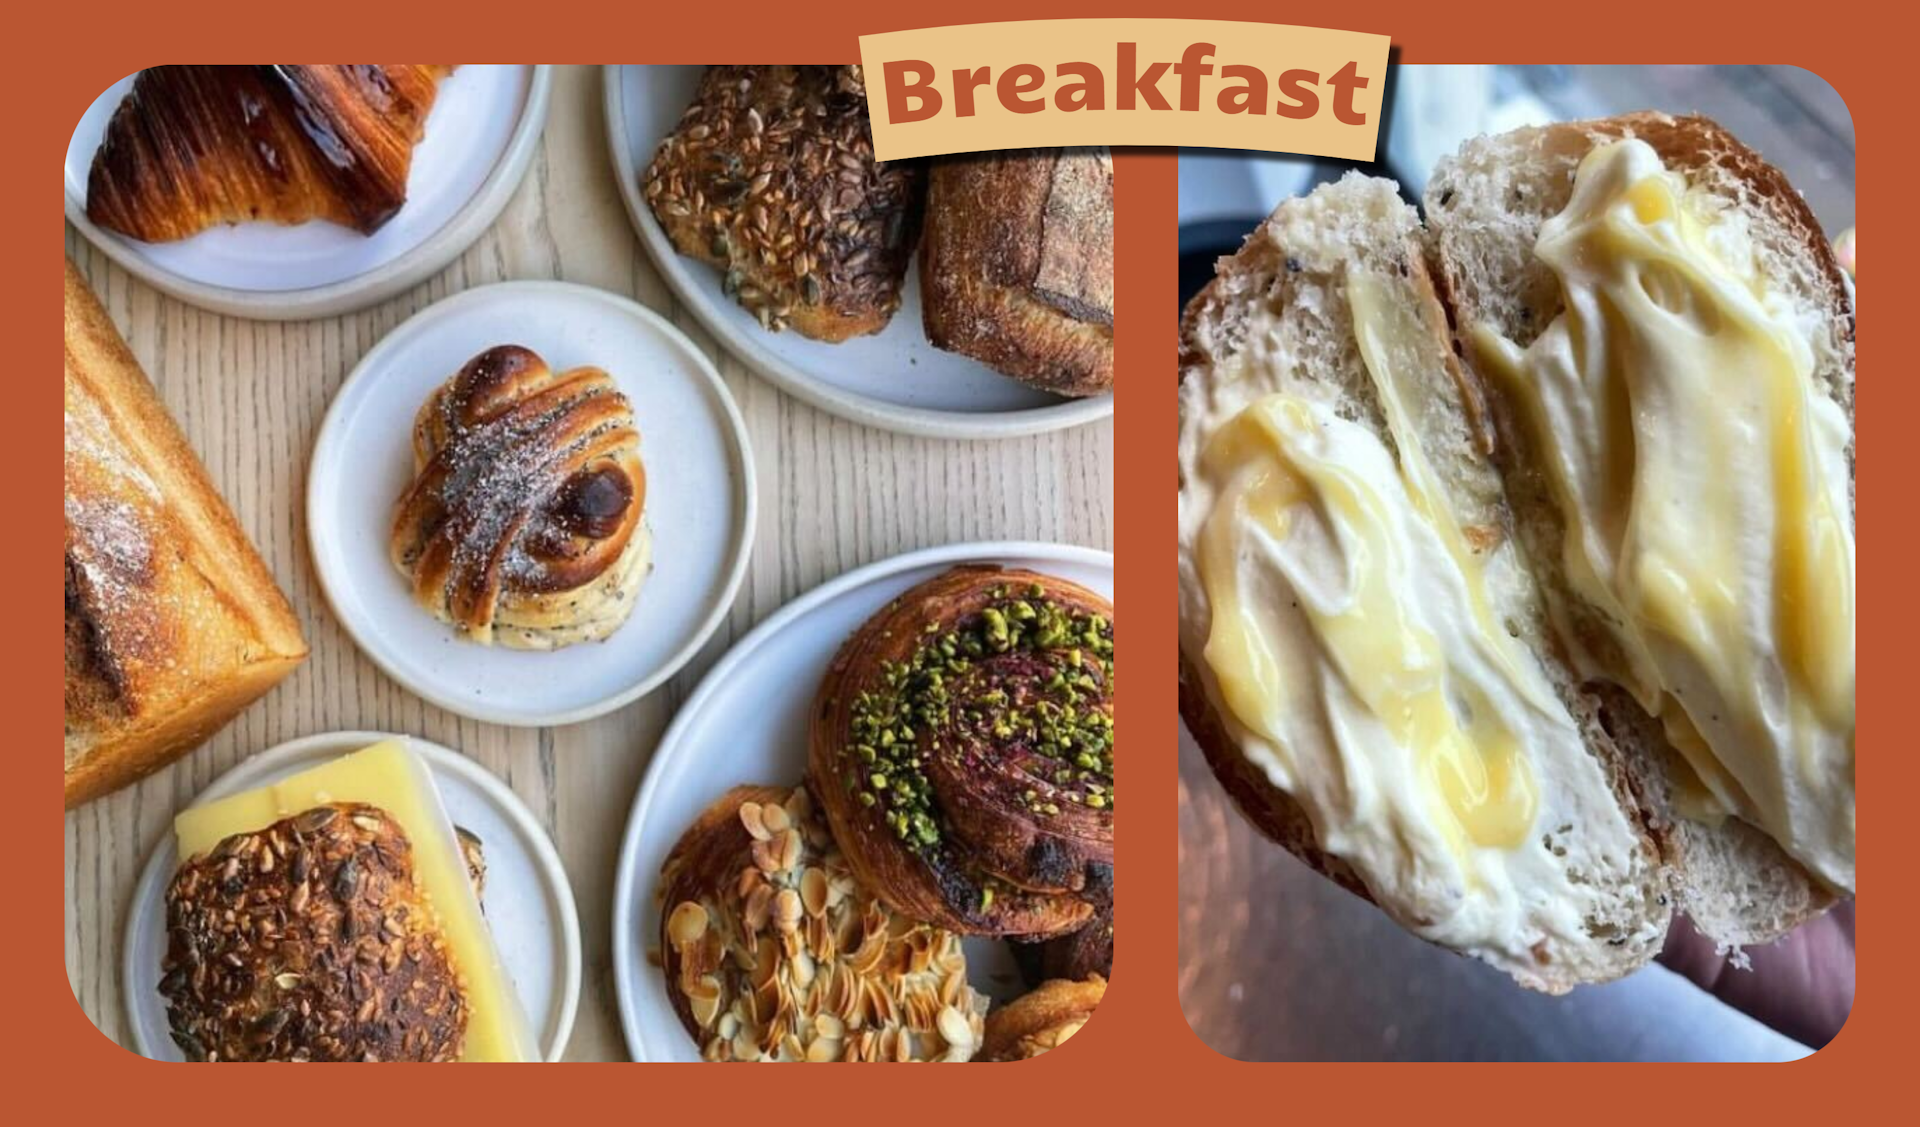 Left image shows a close-up of a lemon cream bun split in half. Right image shows a selection of pastries spread on a table in Juno the Bakery